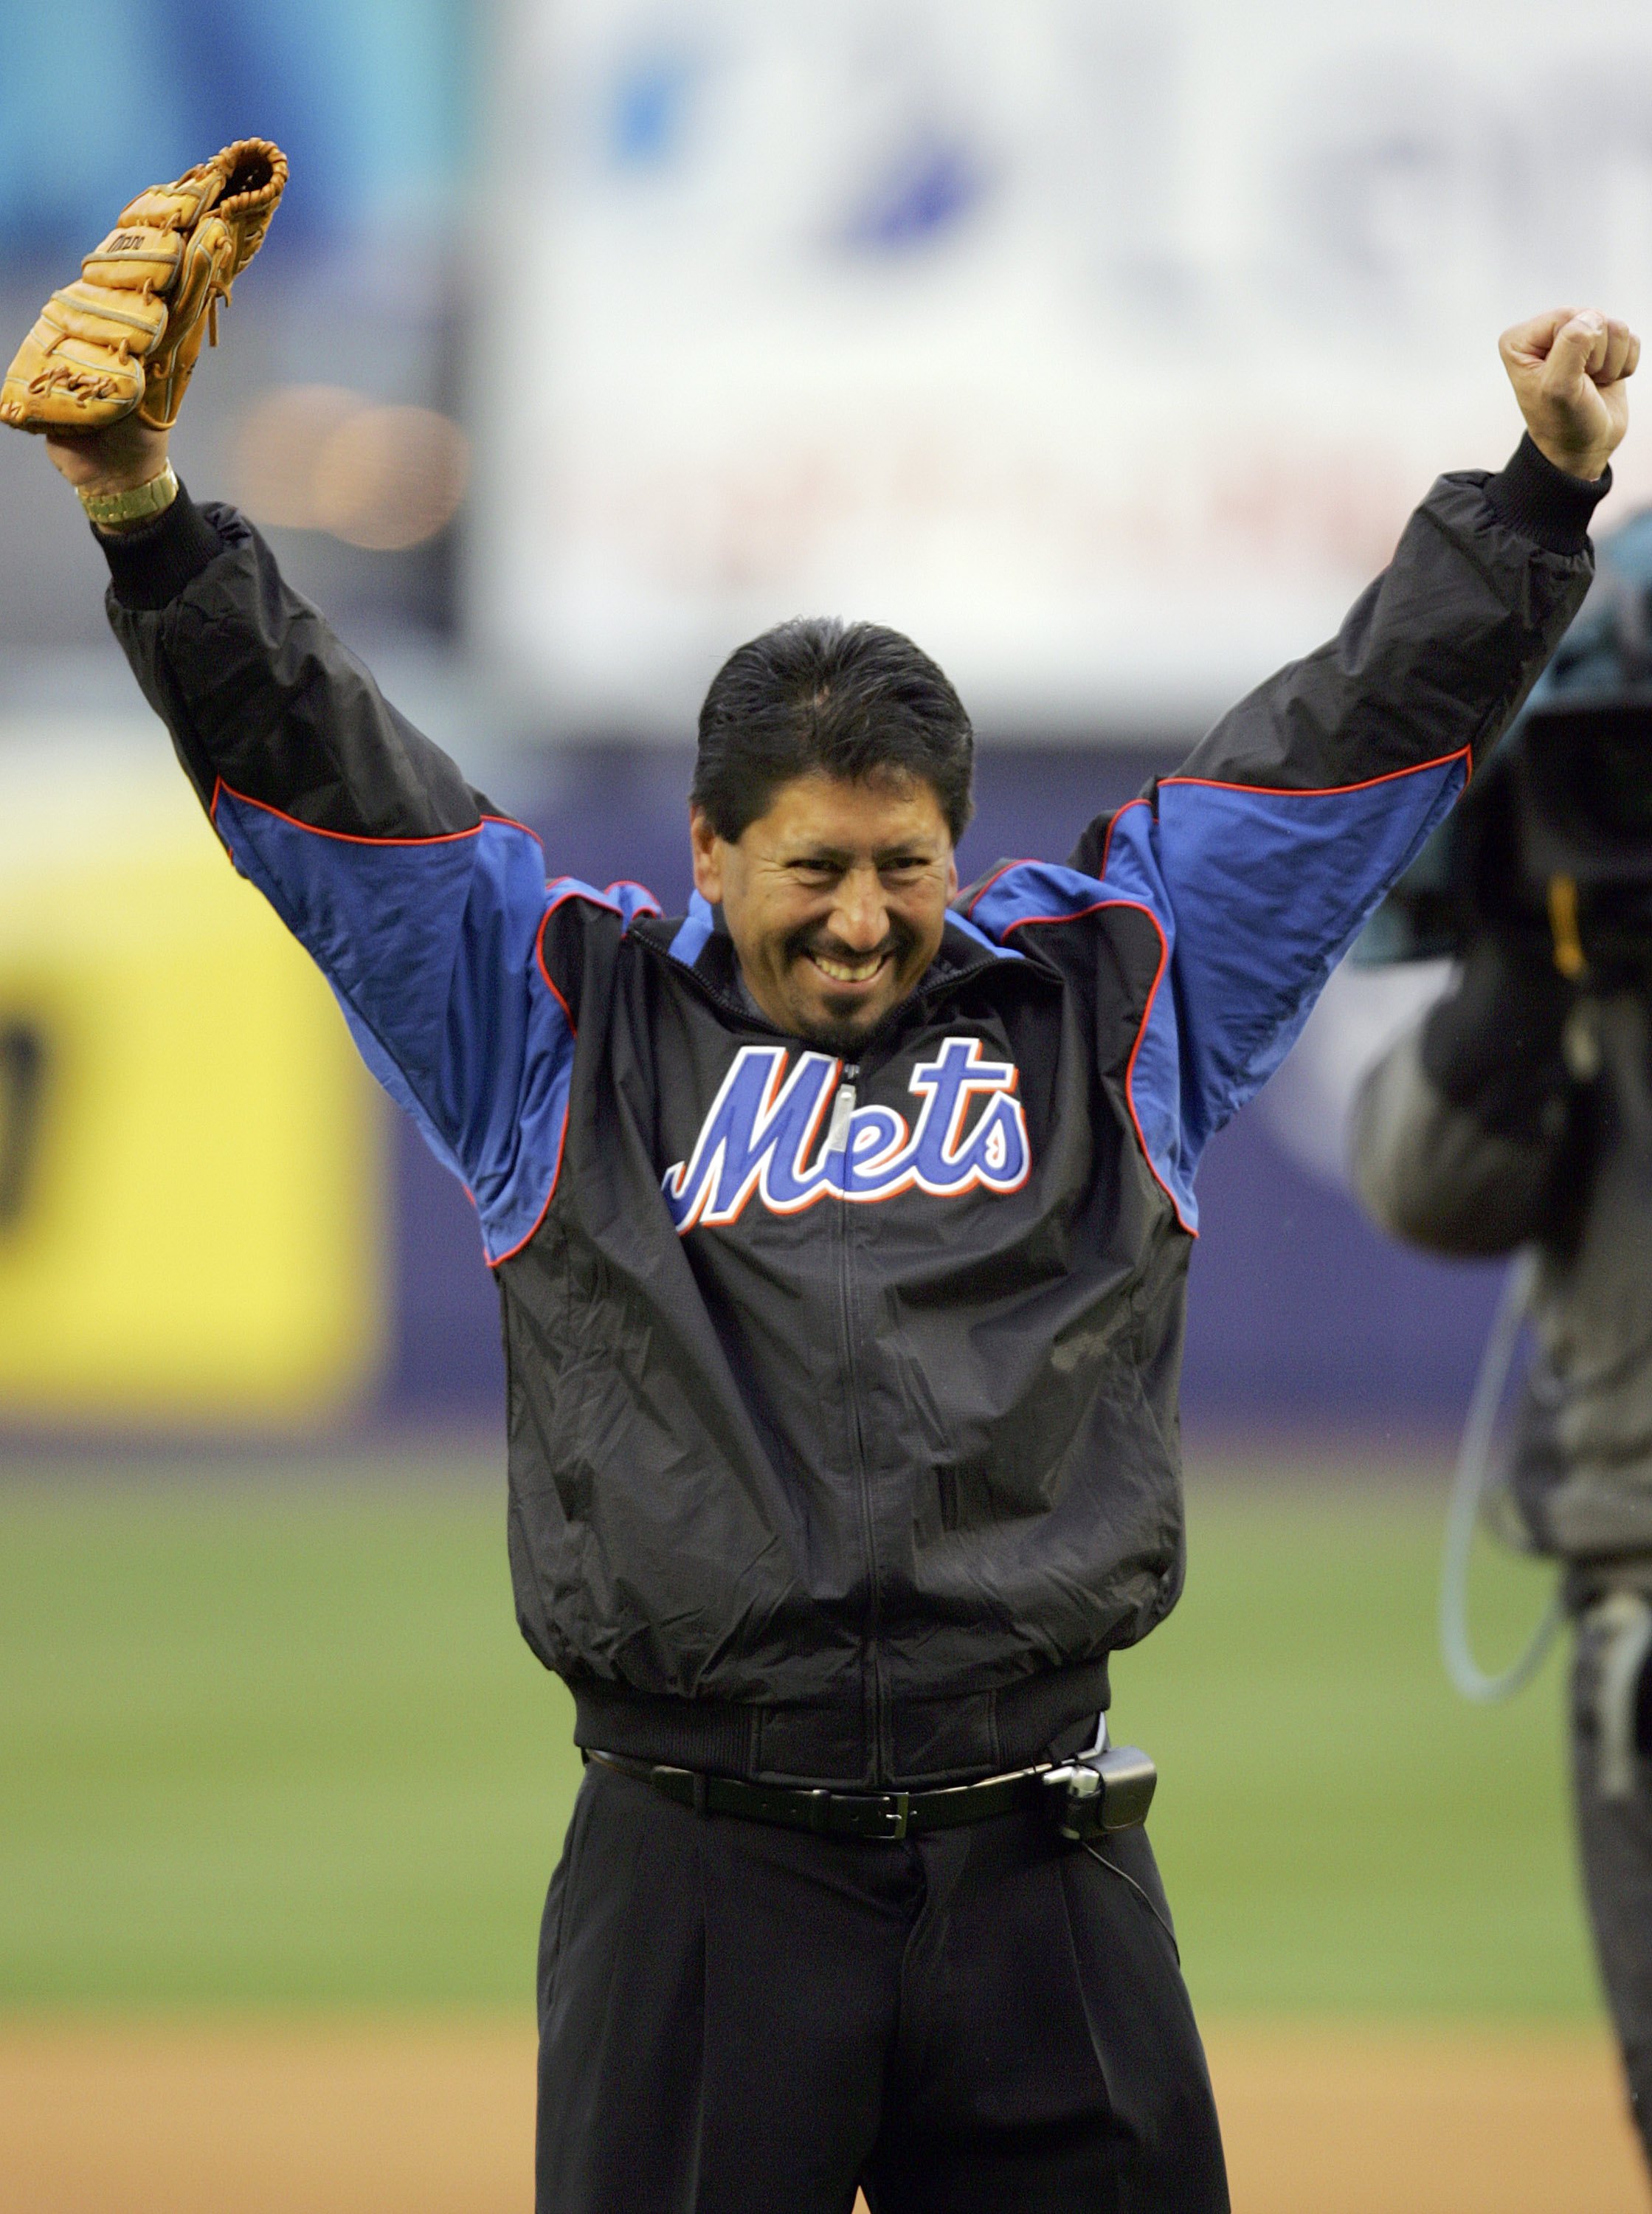 FLUSHING, NY - APRIL 3:  1986 Mets World Series Champion Jesse Orosco throws out the first pitch to his old teammate Gary Carter before the Washington Nationals play the New York Mets on Opening Day at Shea Stadium on April 3, 2006 in Flushing neighborhoo